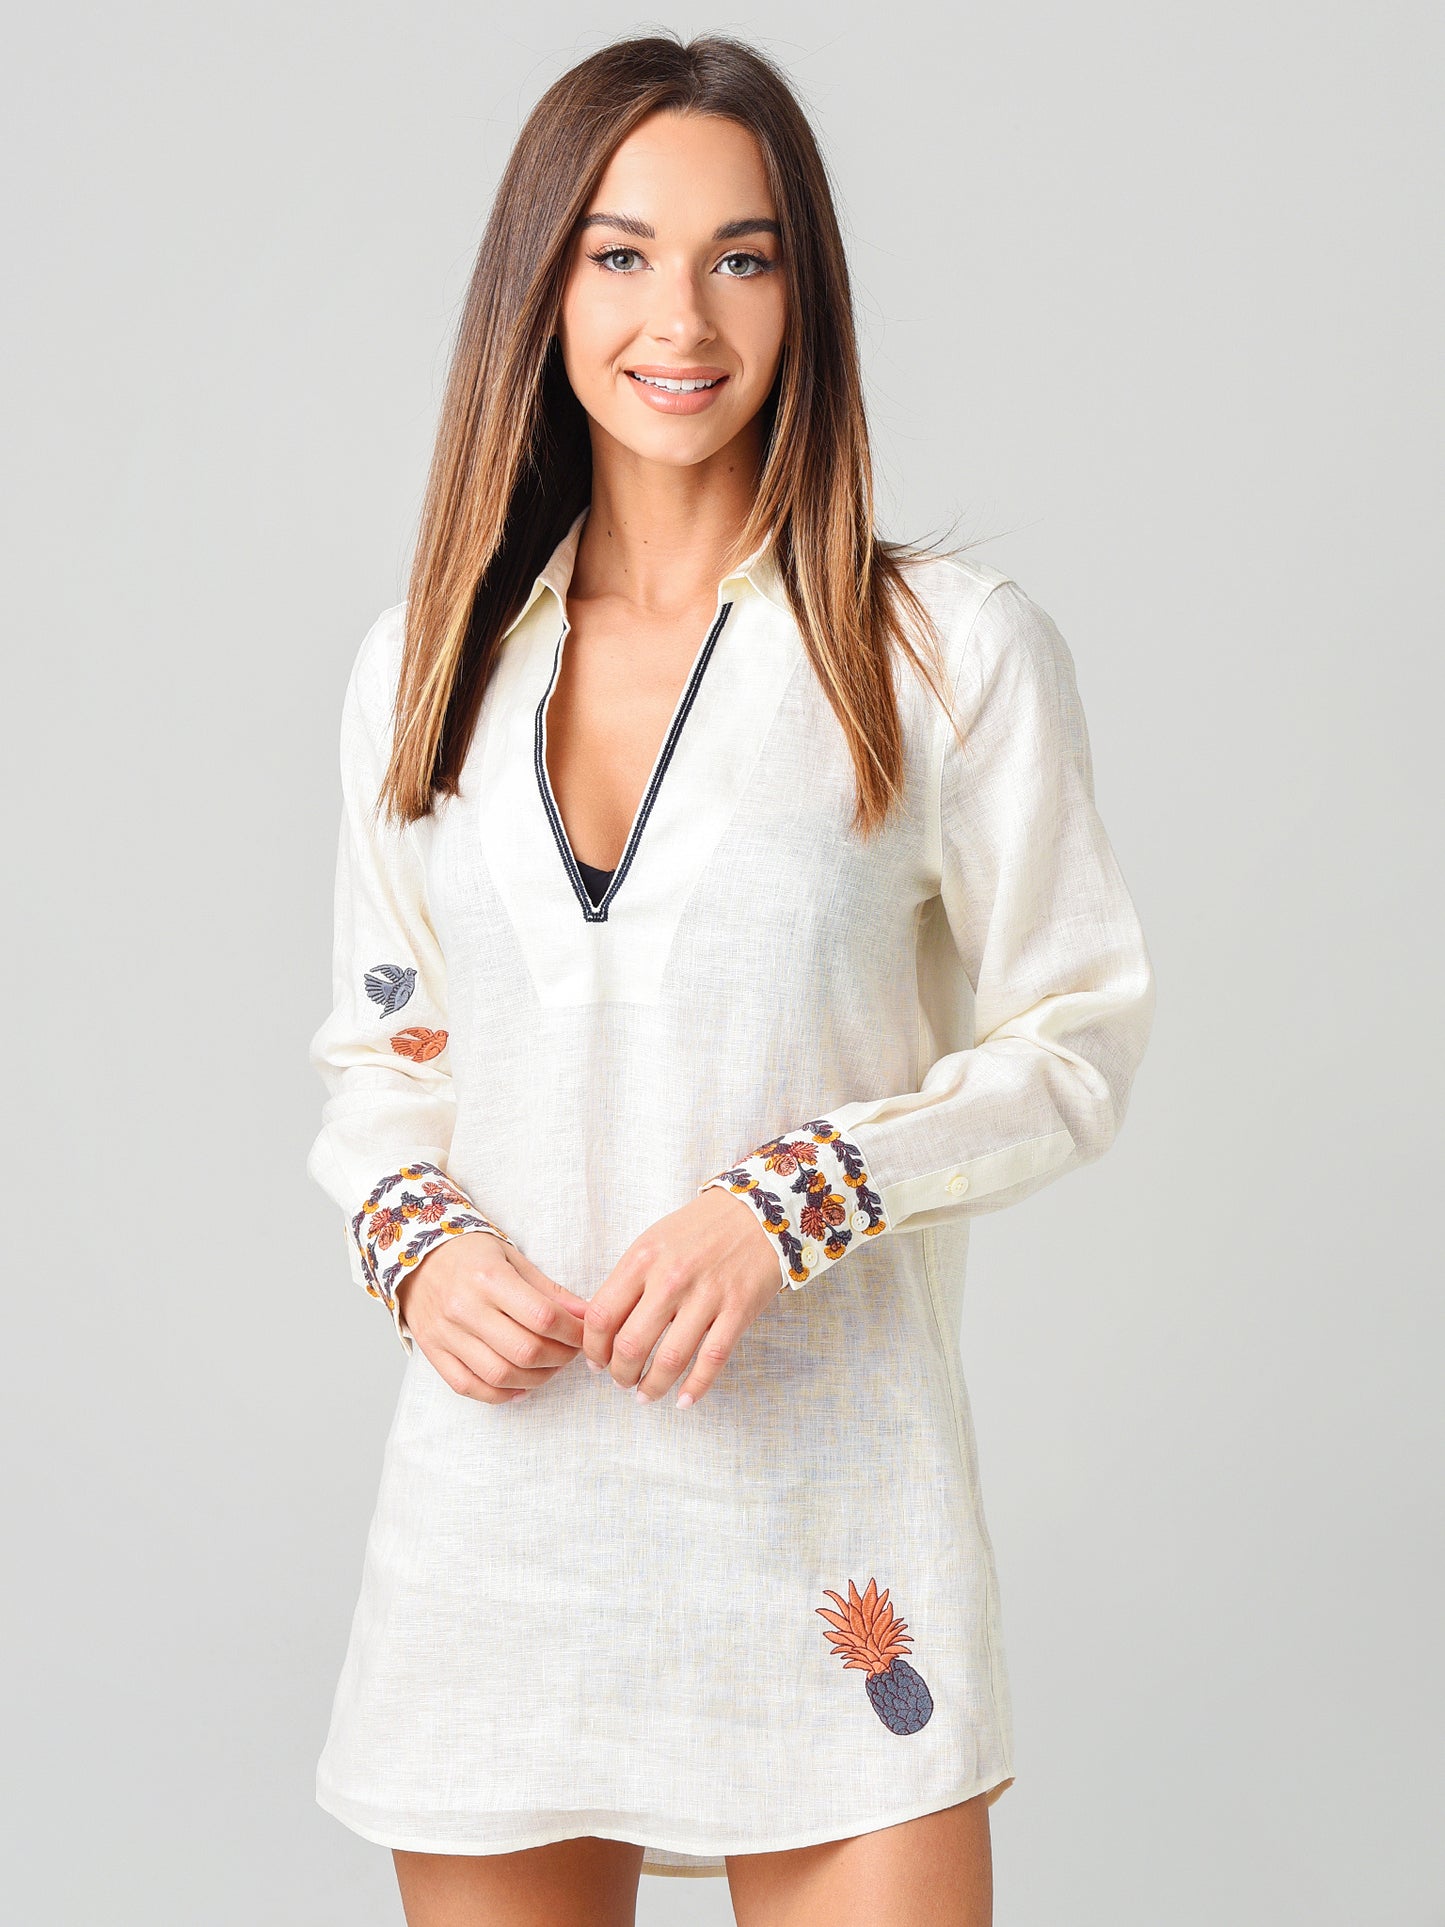 Tory Burch Women's Embroidered Beach Shirt Cover-Up